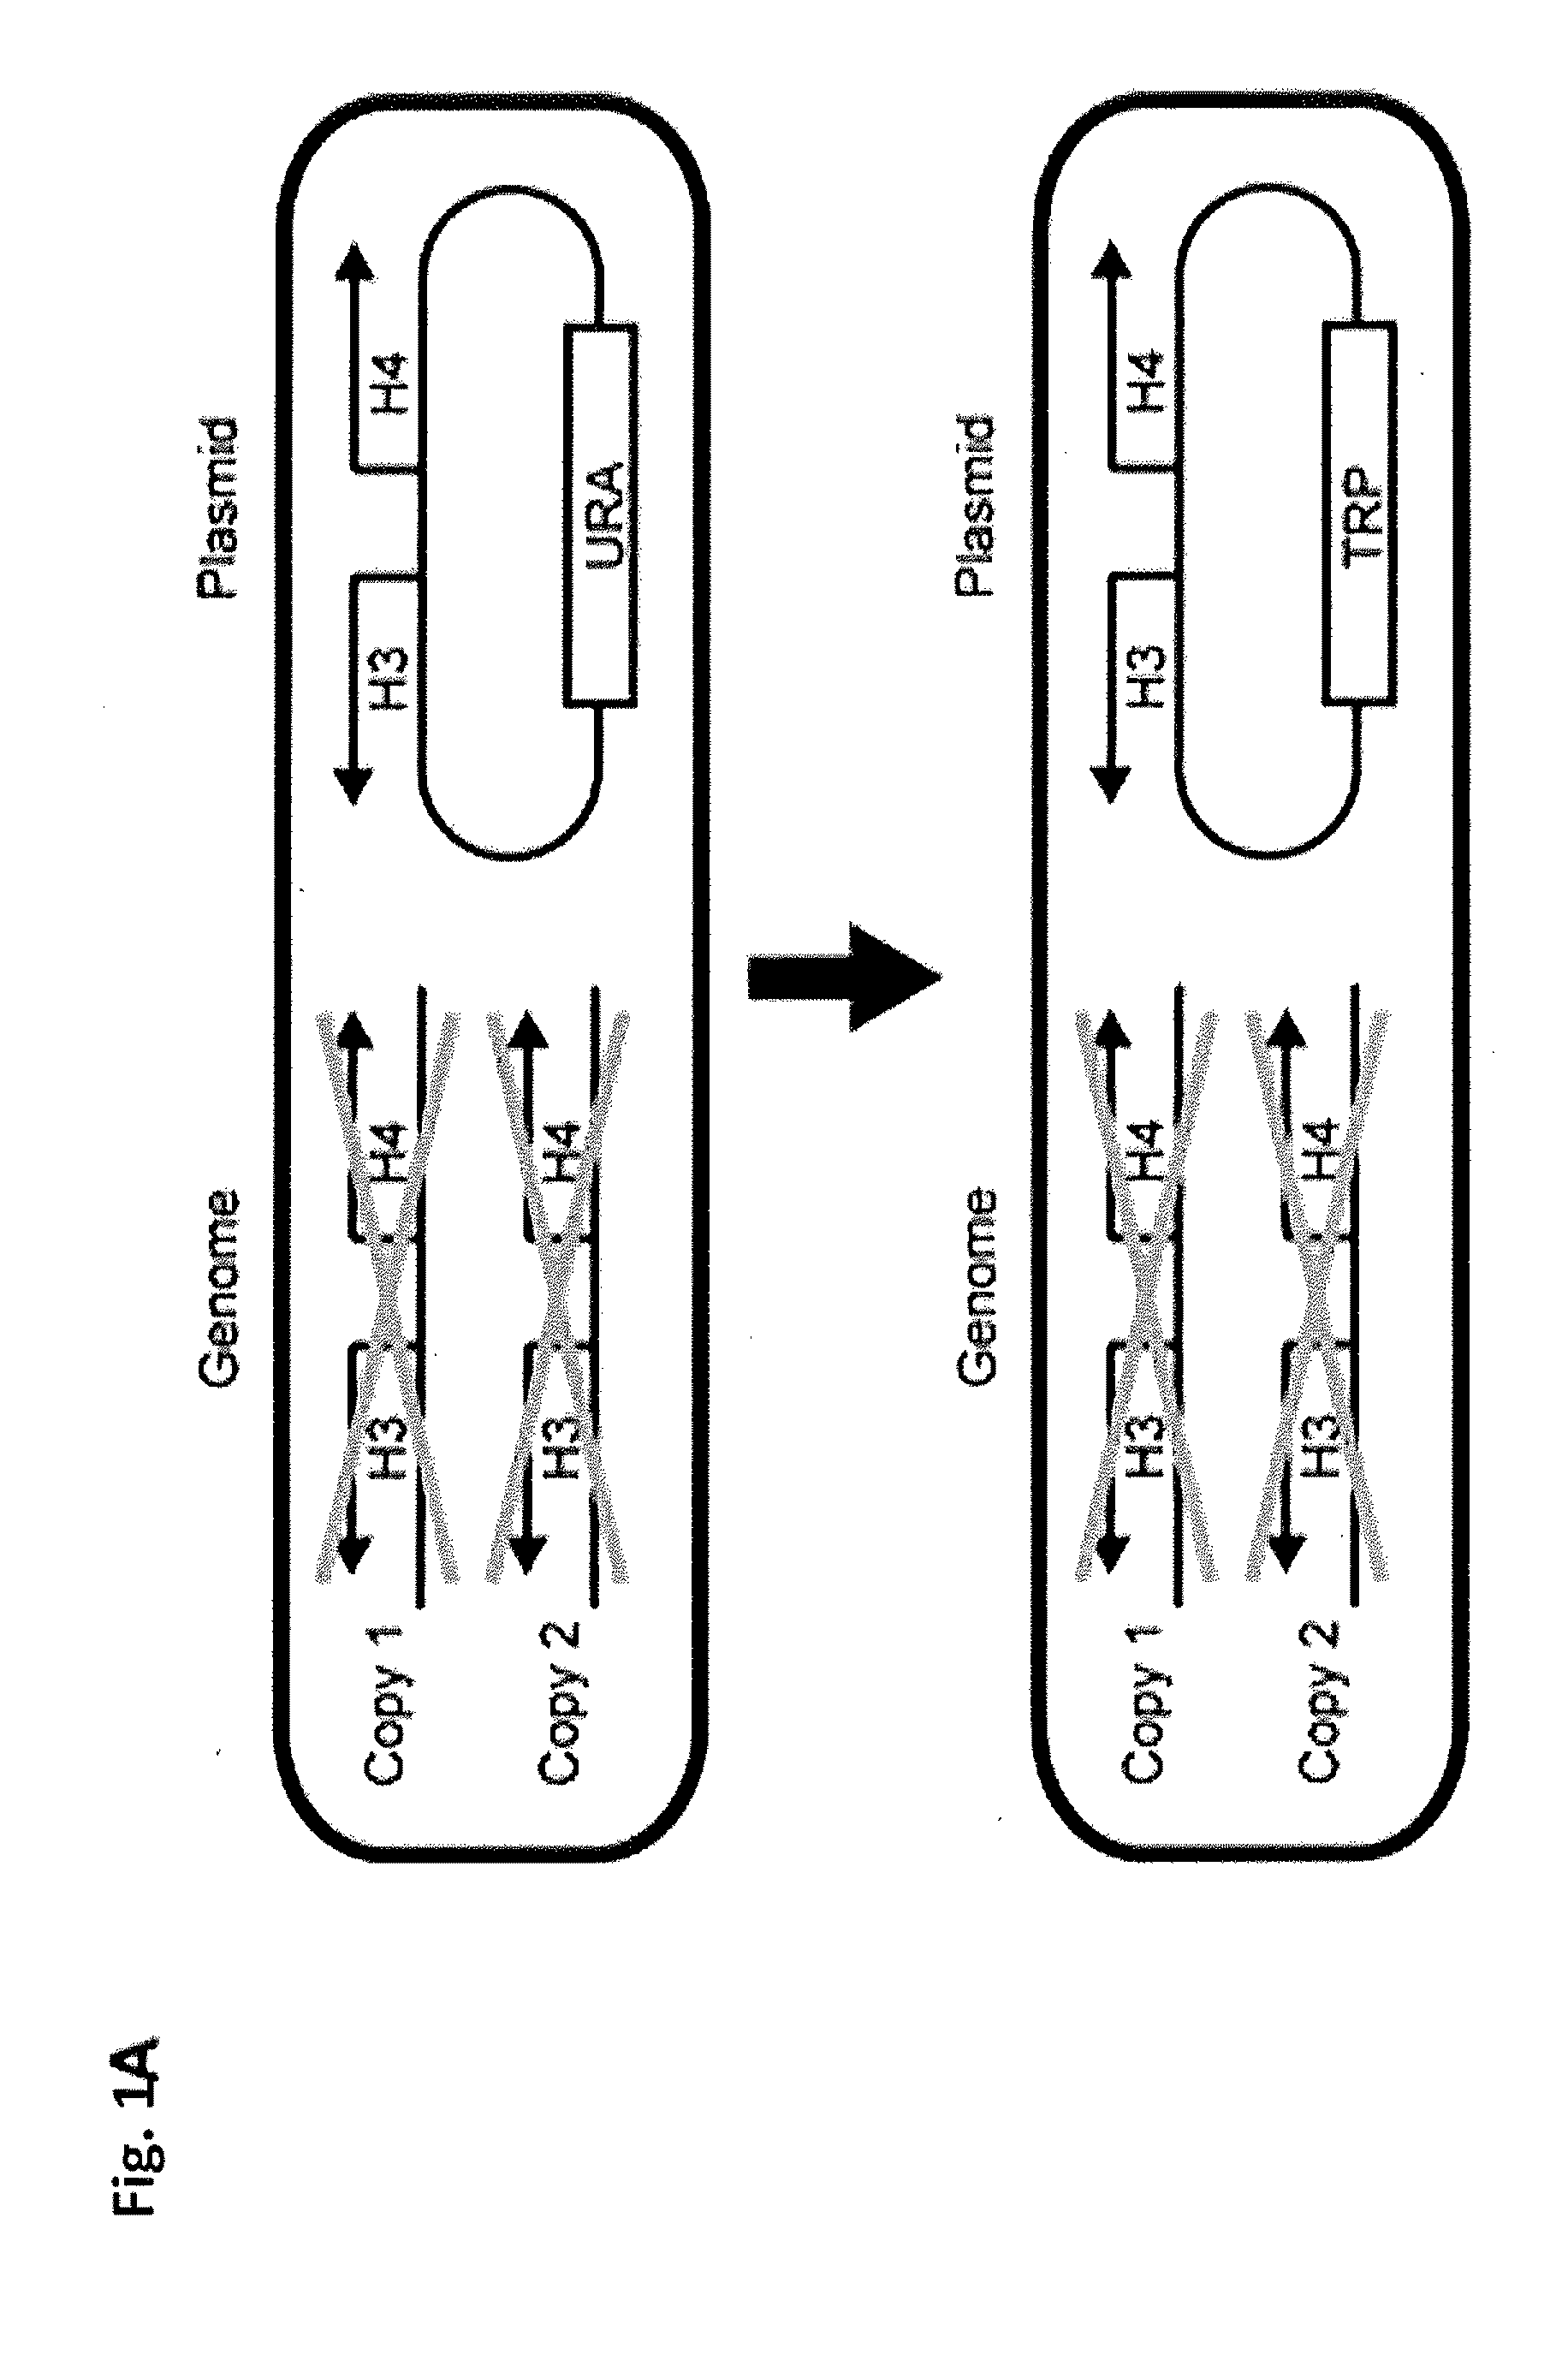 Compositions and Methods for the Identification and Use of Epigenetic Markers Useful in the Study of Normal and Abnormal Mammalian Gametogenesis